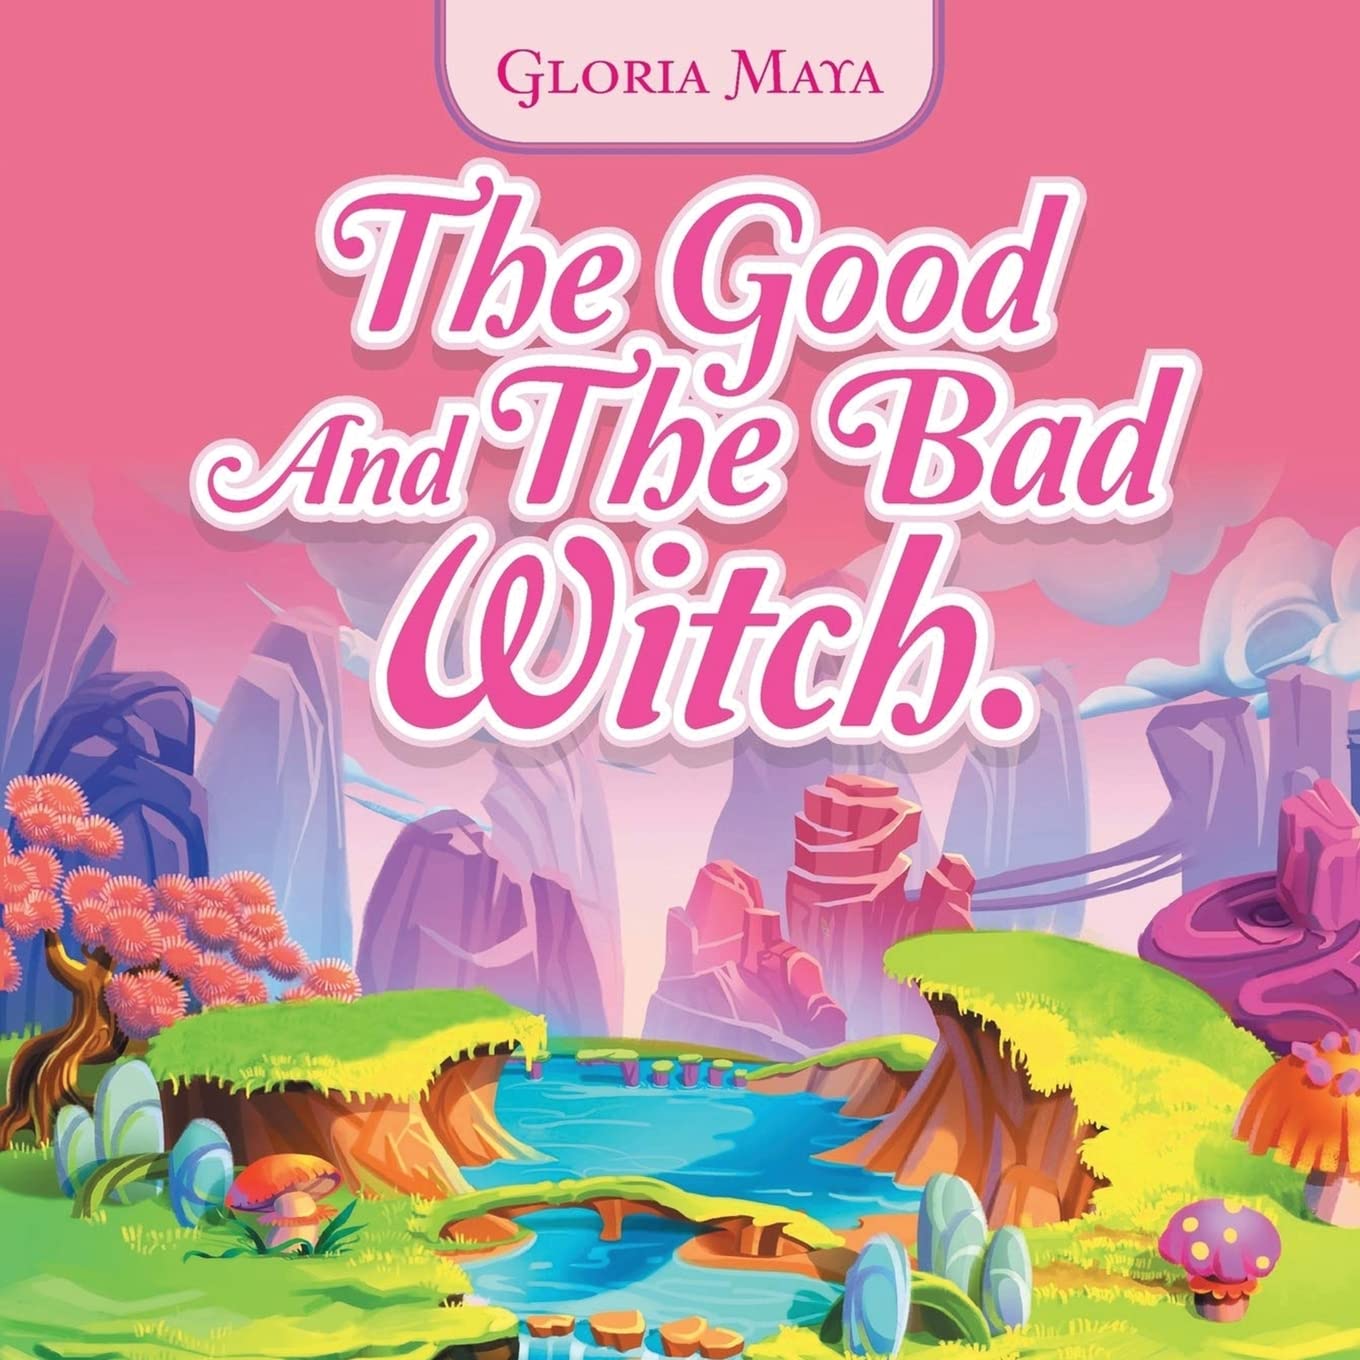 Gloria Maya has released her new children's book, The Good and the Bad Witch; published by Author’s Tranquility Press